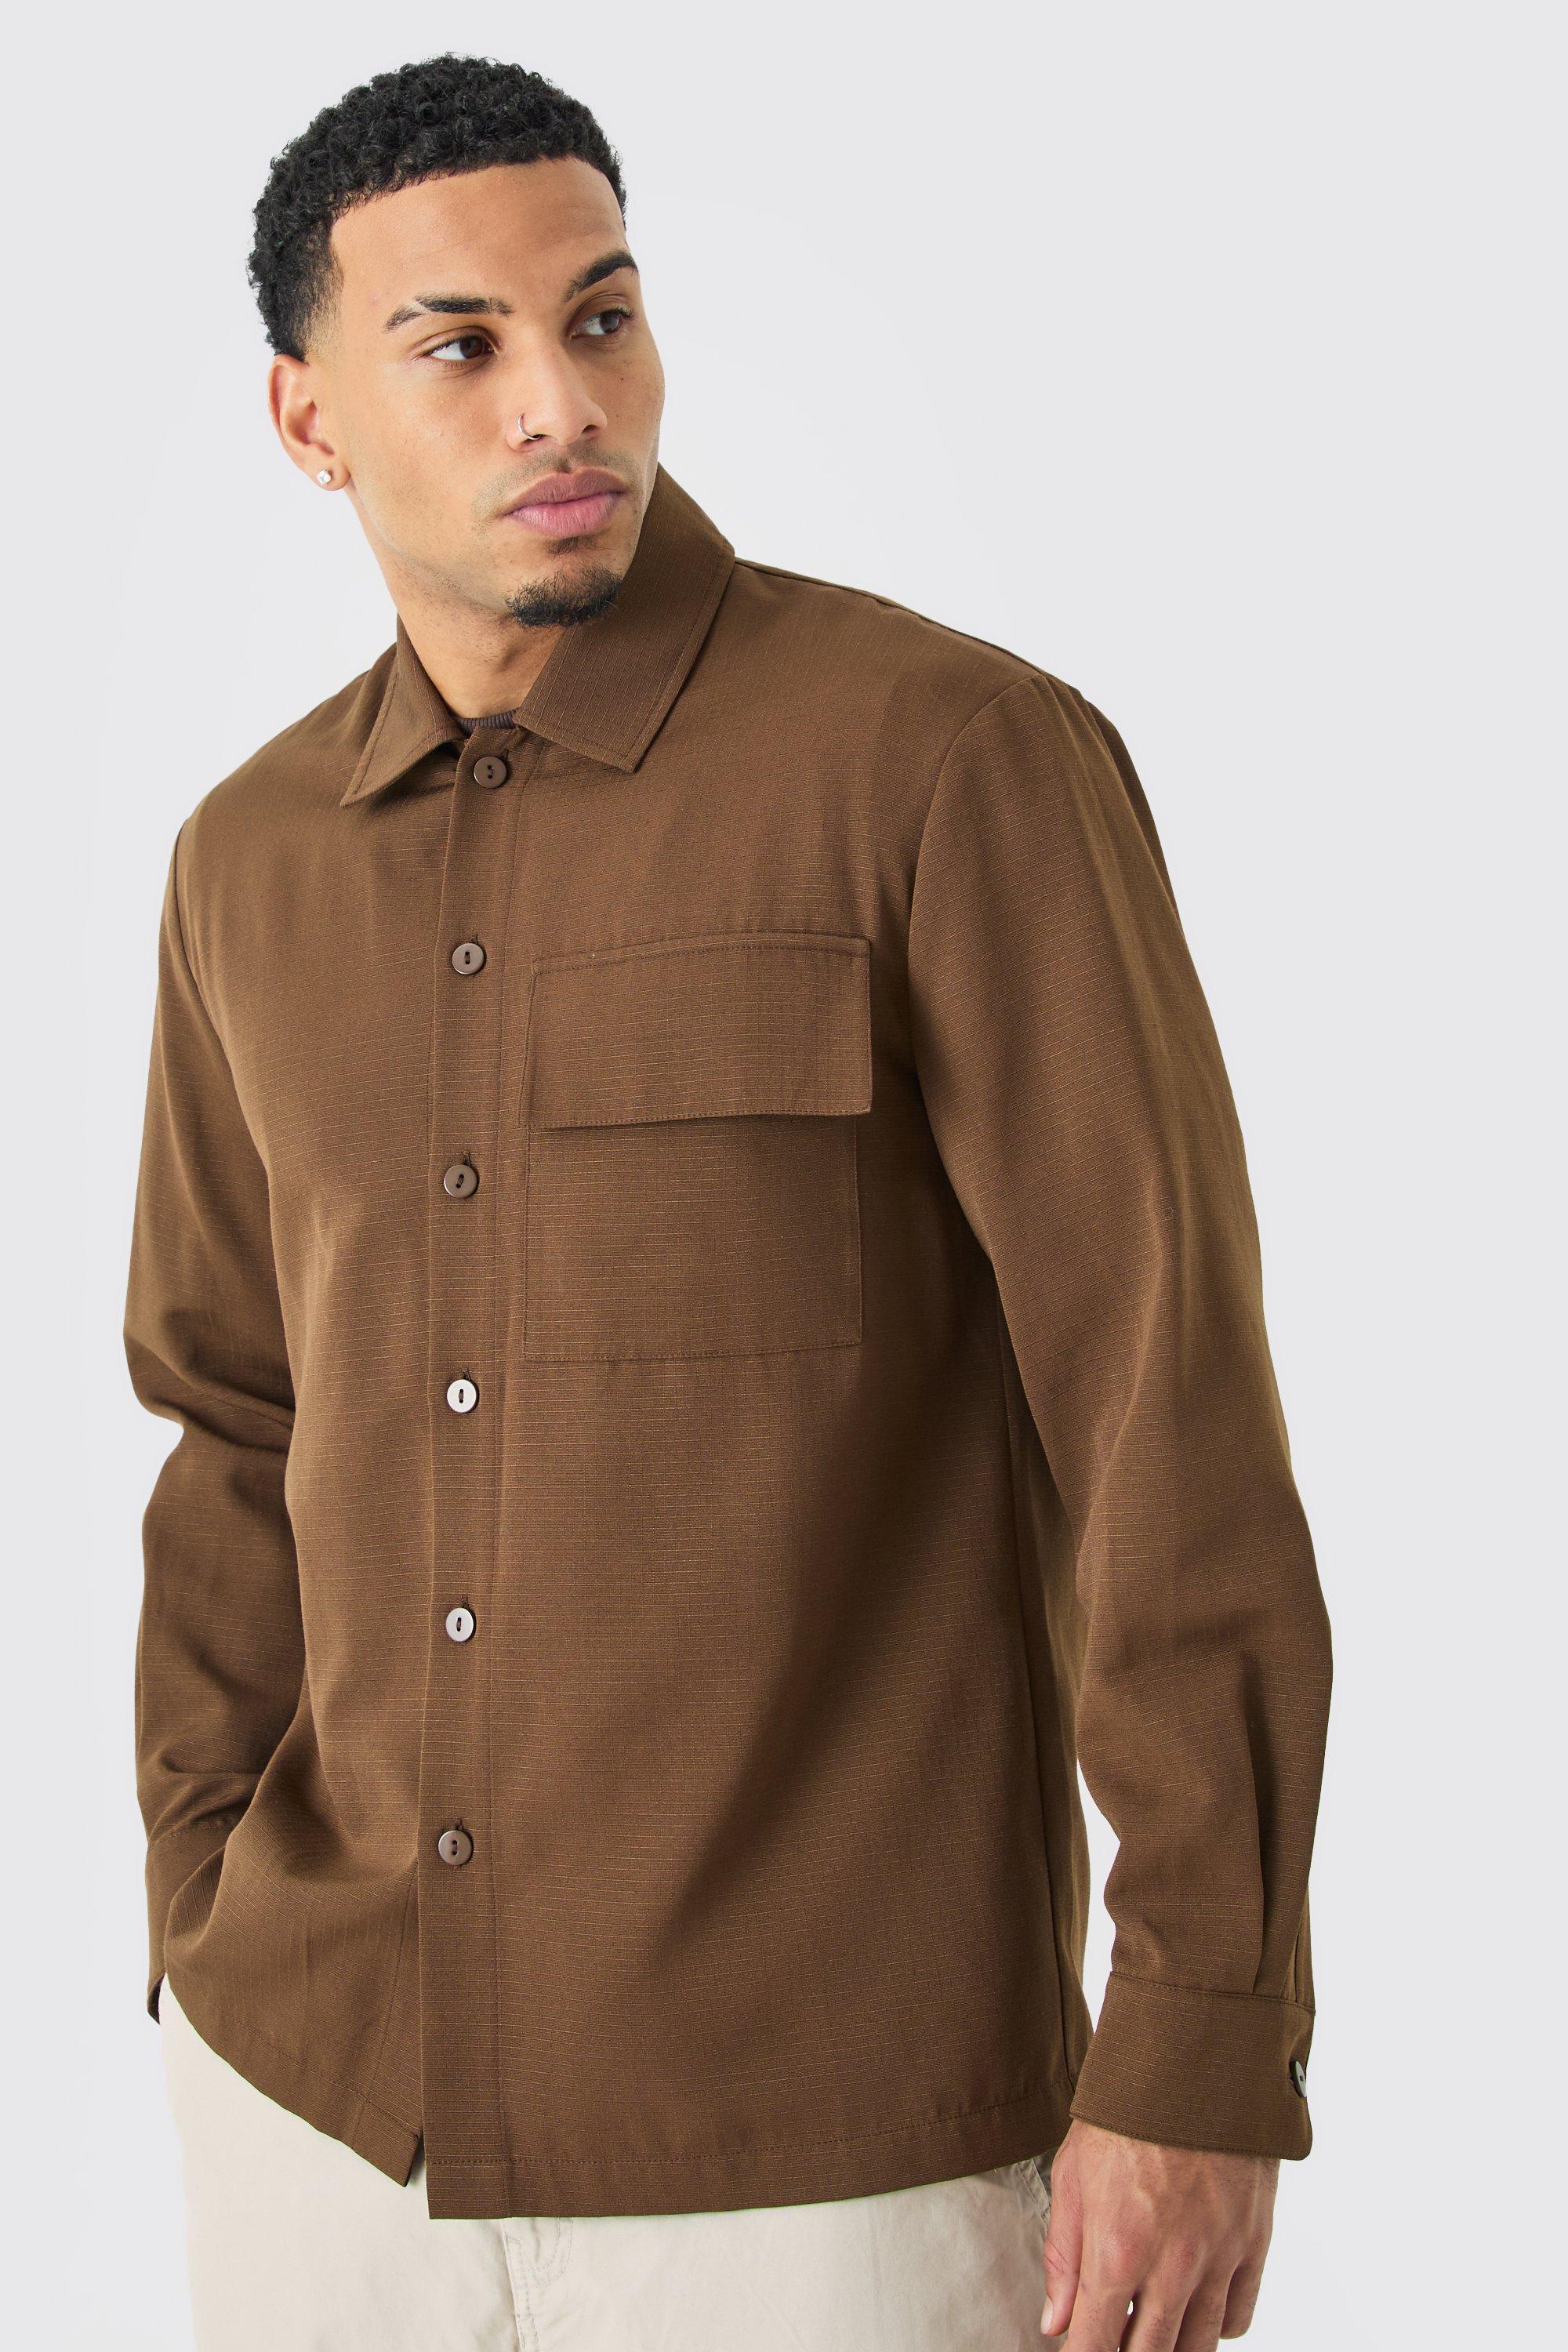 Image of Sovracamicia Regular Fit a maniche lunghe in nylon ripstop, Brown